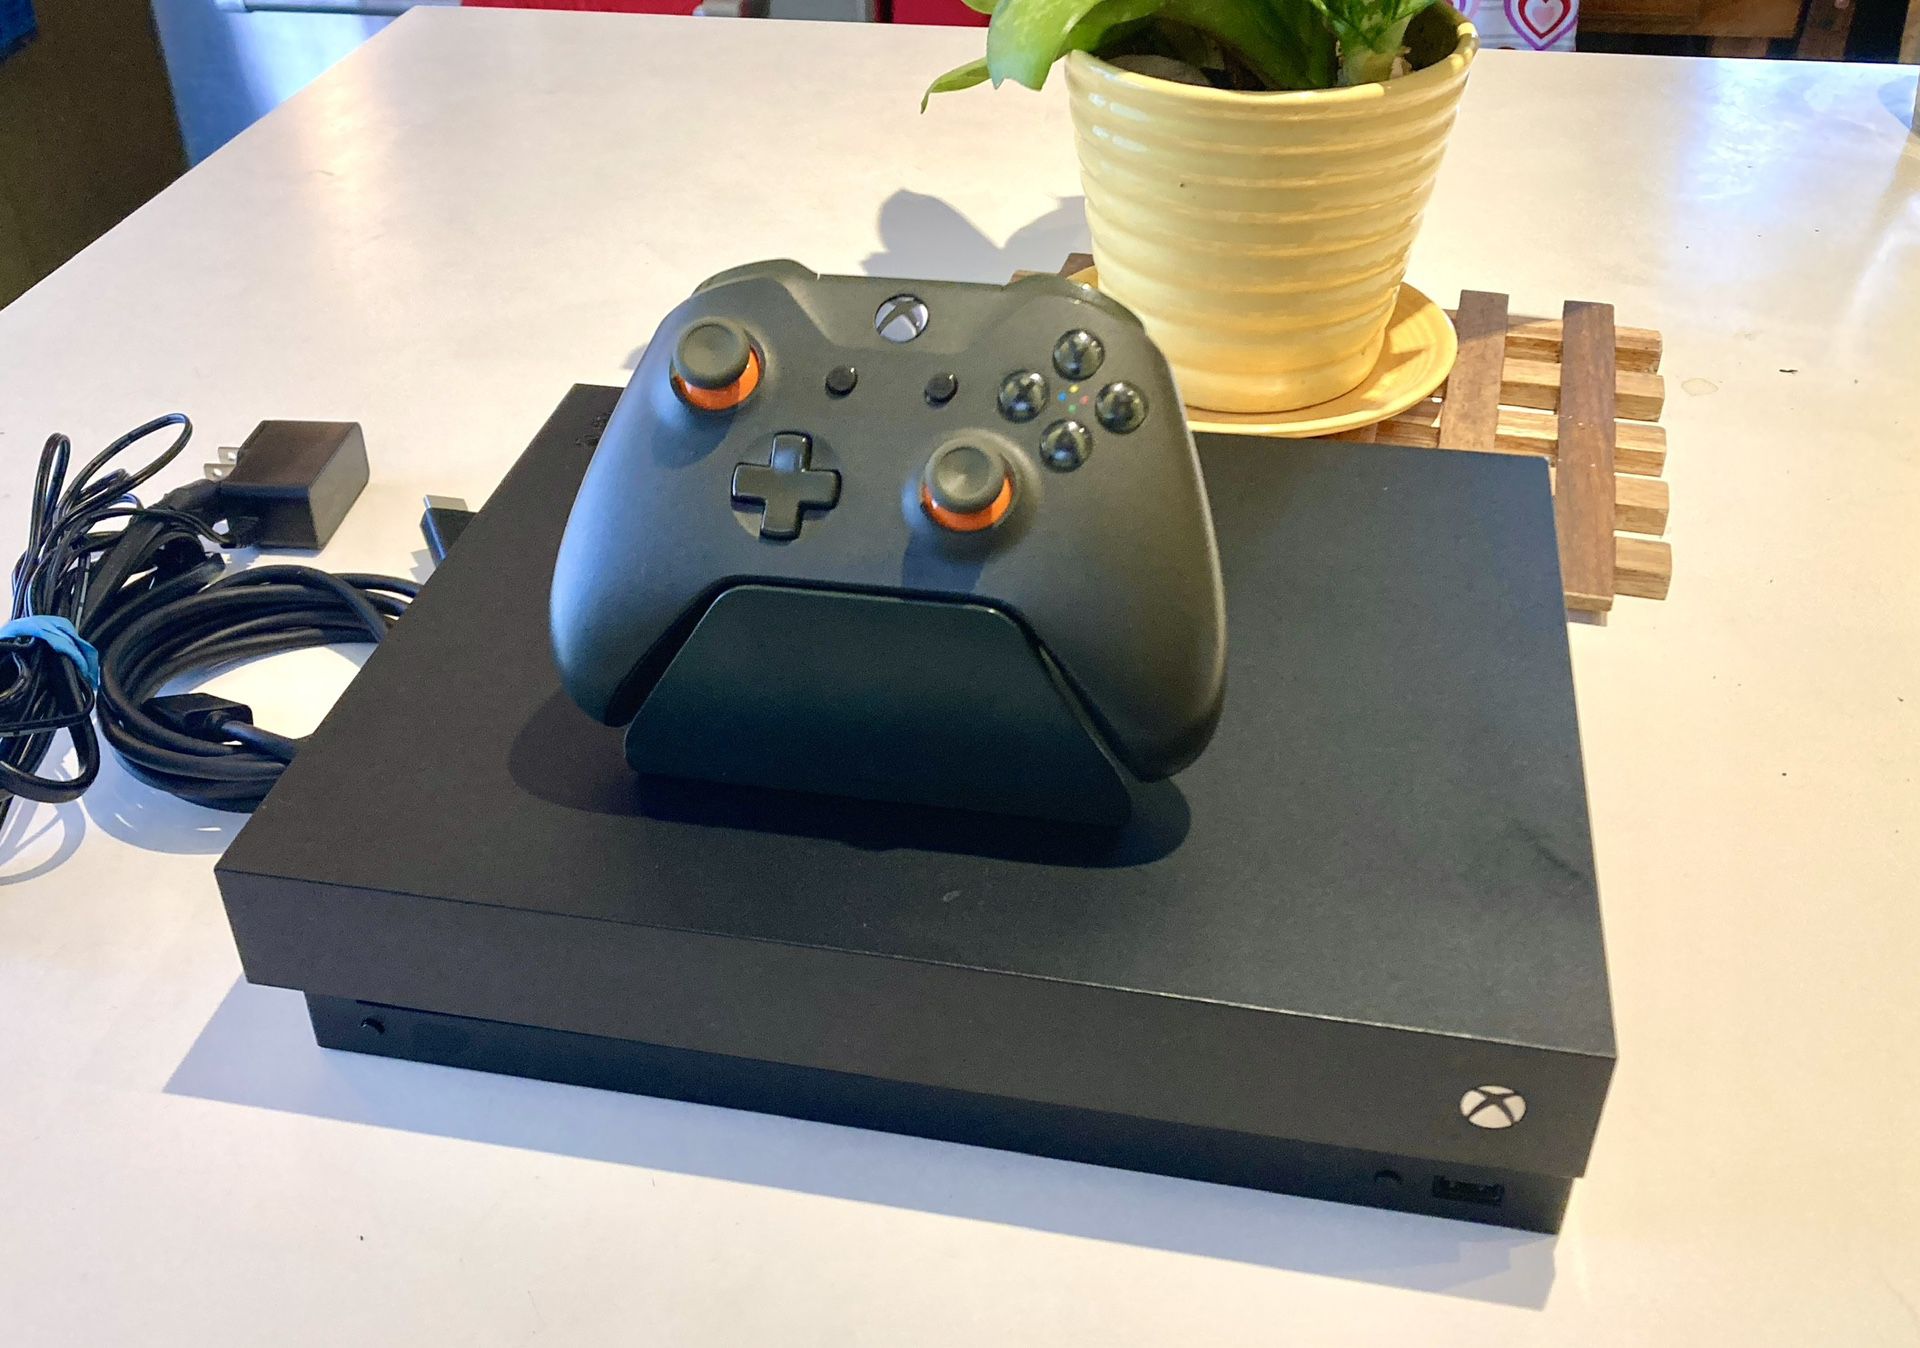 Xbox One X 1tb HDD + Controller & Charging Stand All In Excellent Condition